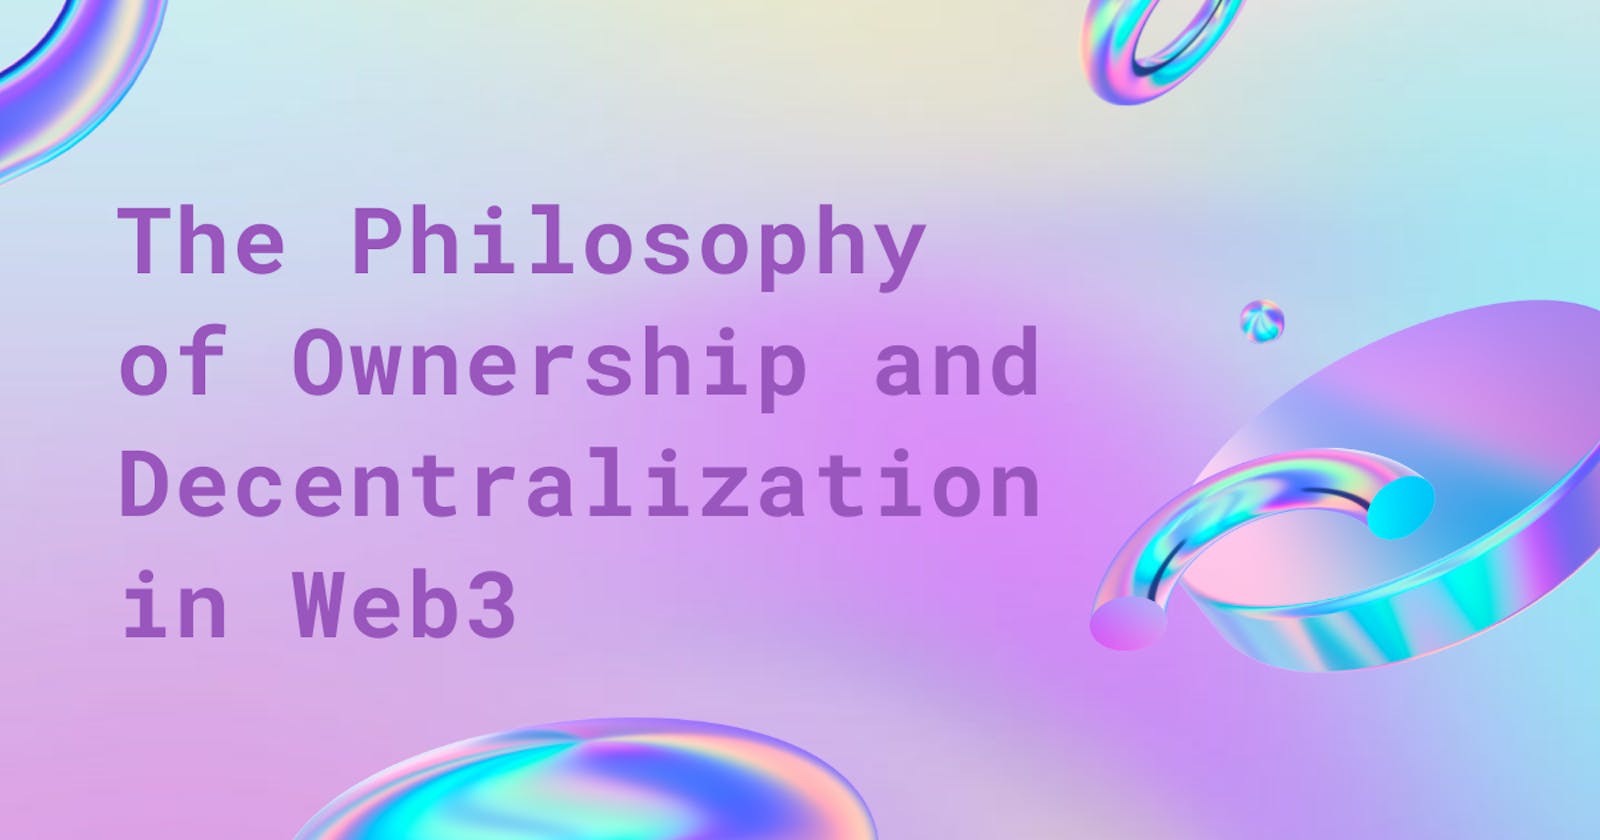 The Philosophy of Ownership and Decentralization in Web3